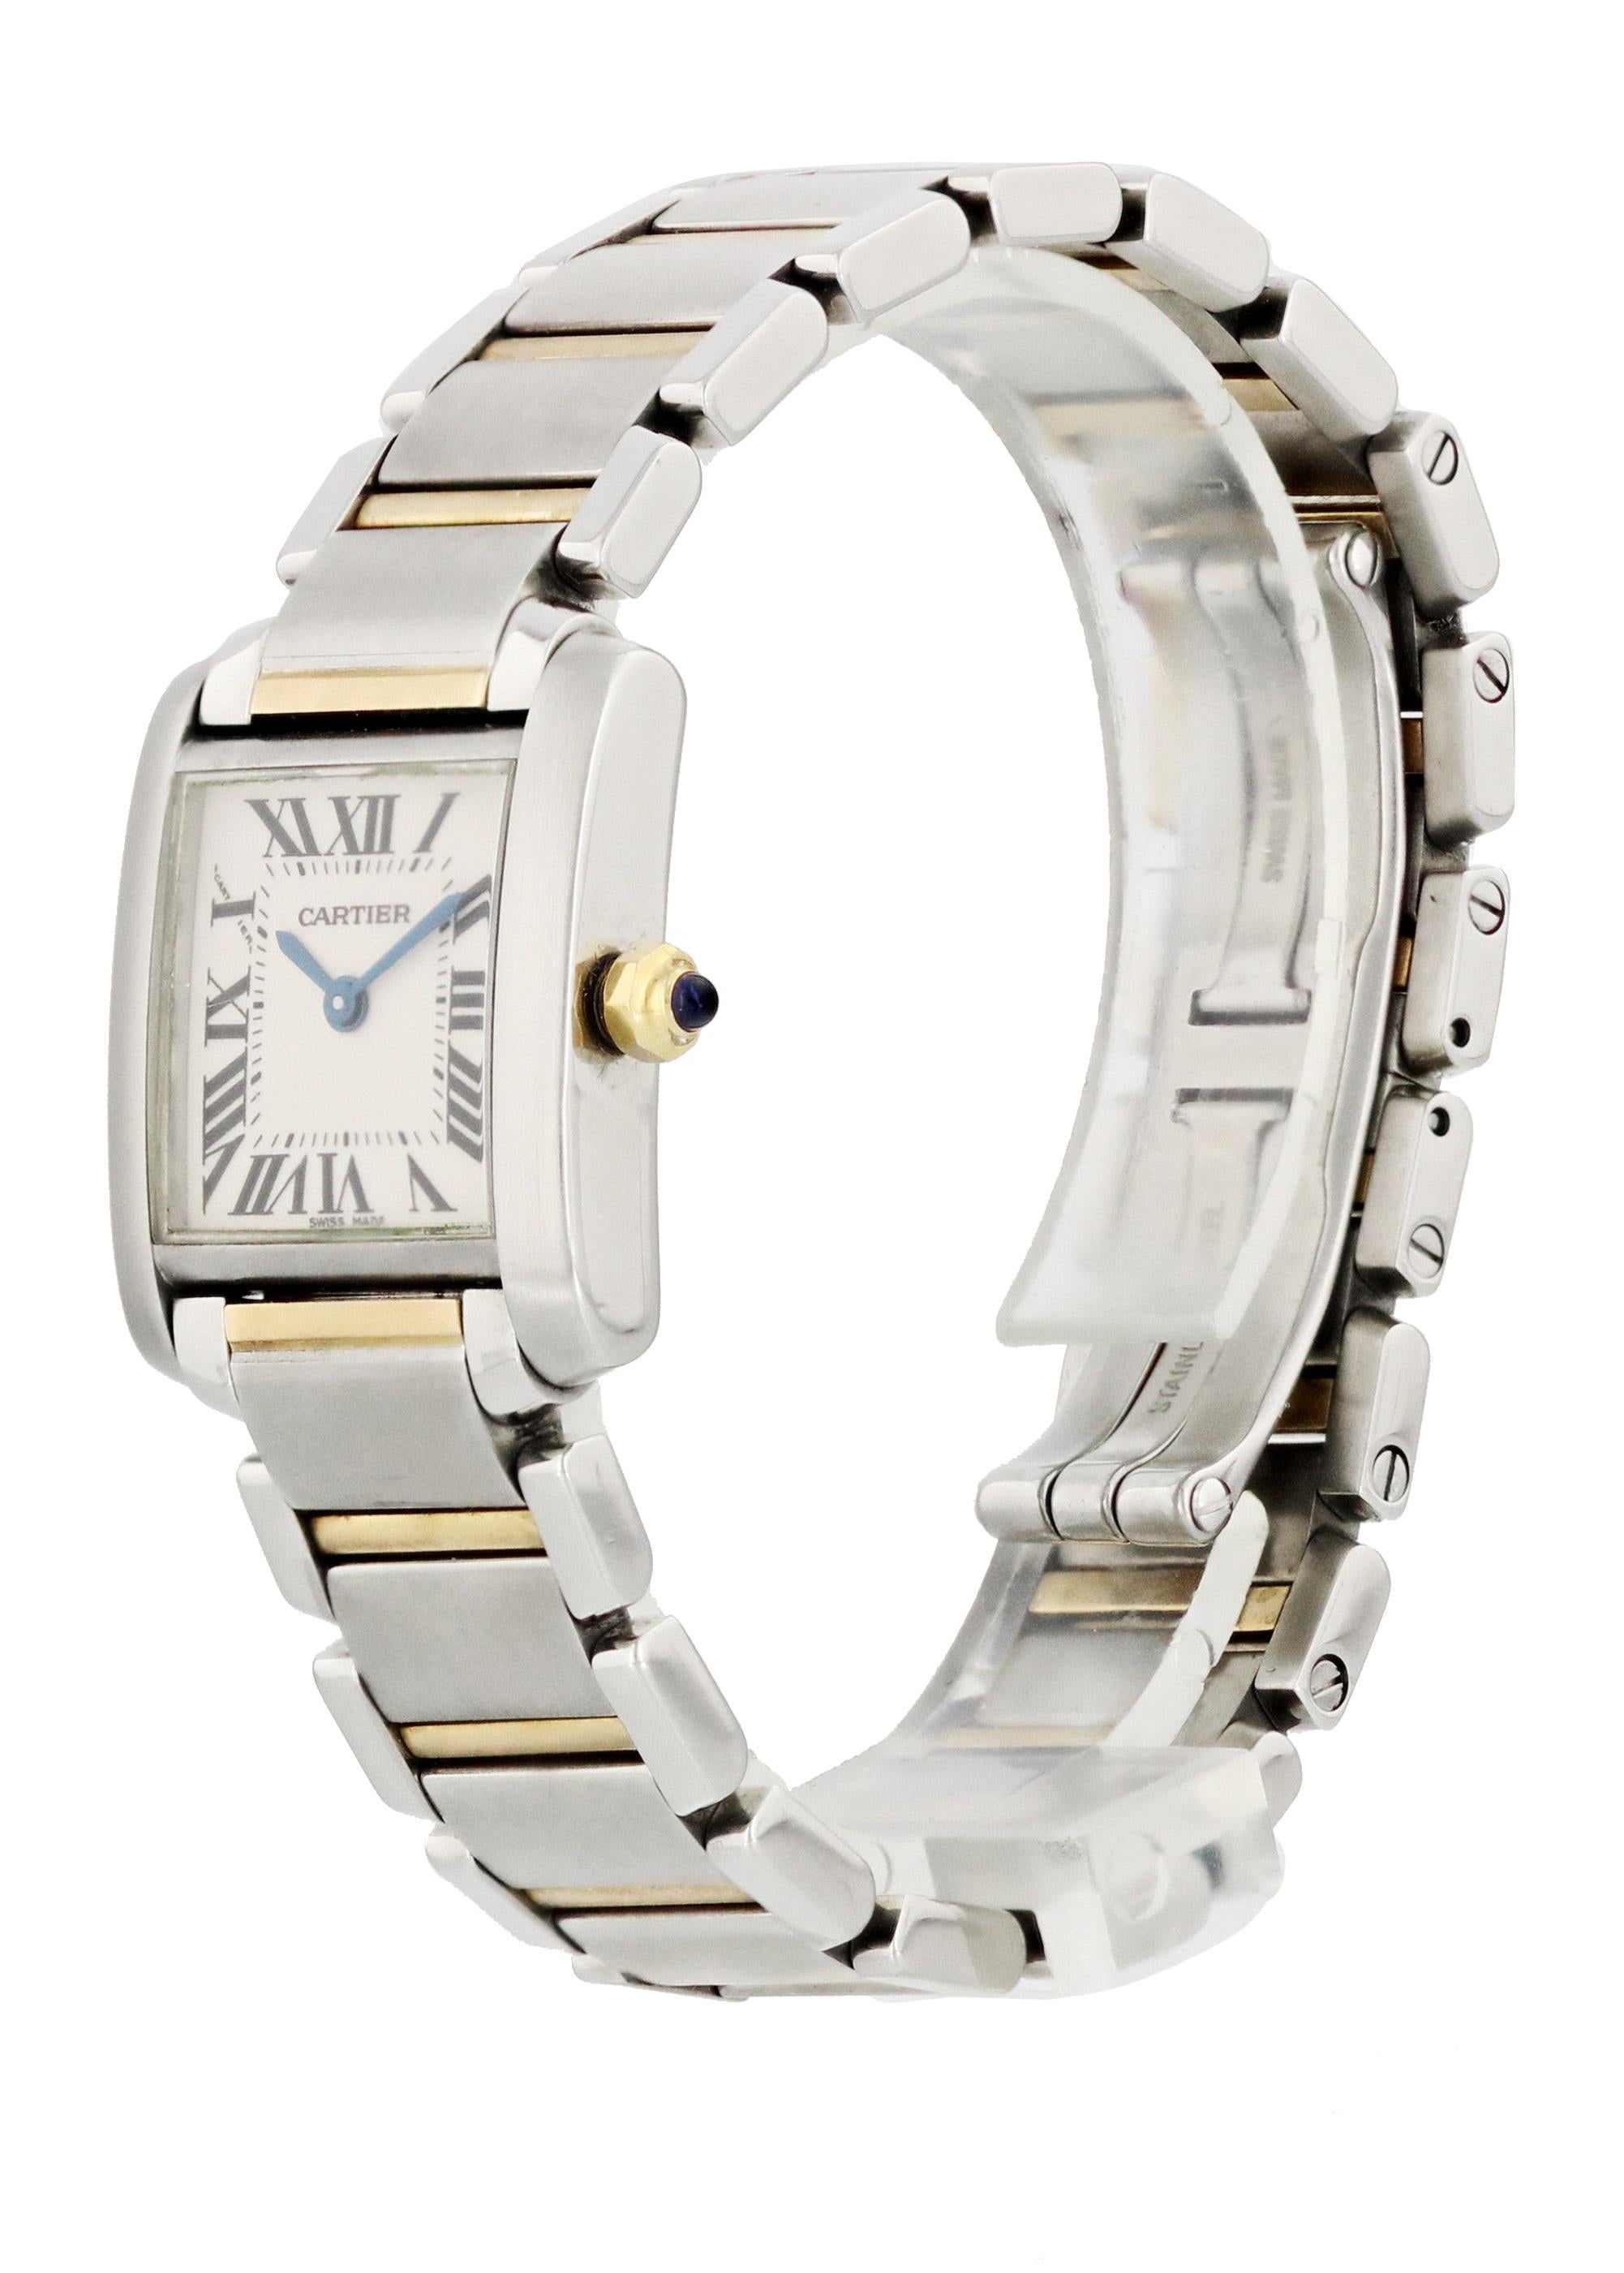 Cartier Tank Francaise 2384 Ladies Watch. 20 x 24mm Stainless Steel case. Stainless Steel Stationary bezel. Off-White dial with Blue steel hands and roman numeral hour markers. Minute markers on the inner dial. Stainless Steel Bracelet with